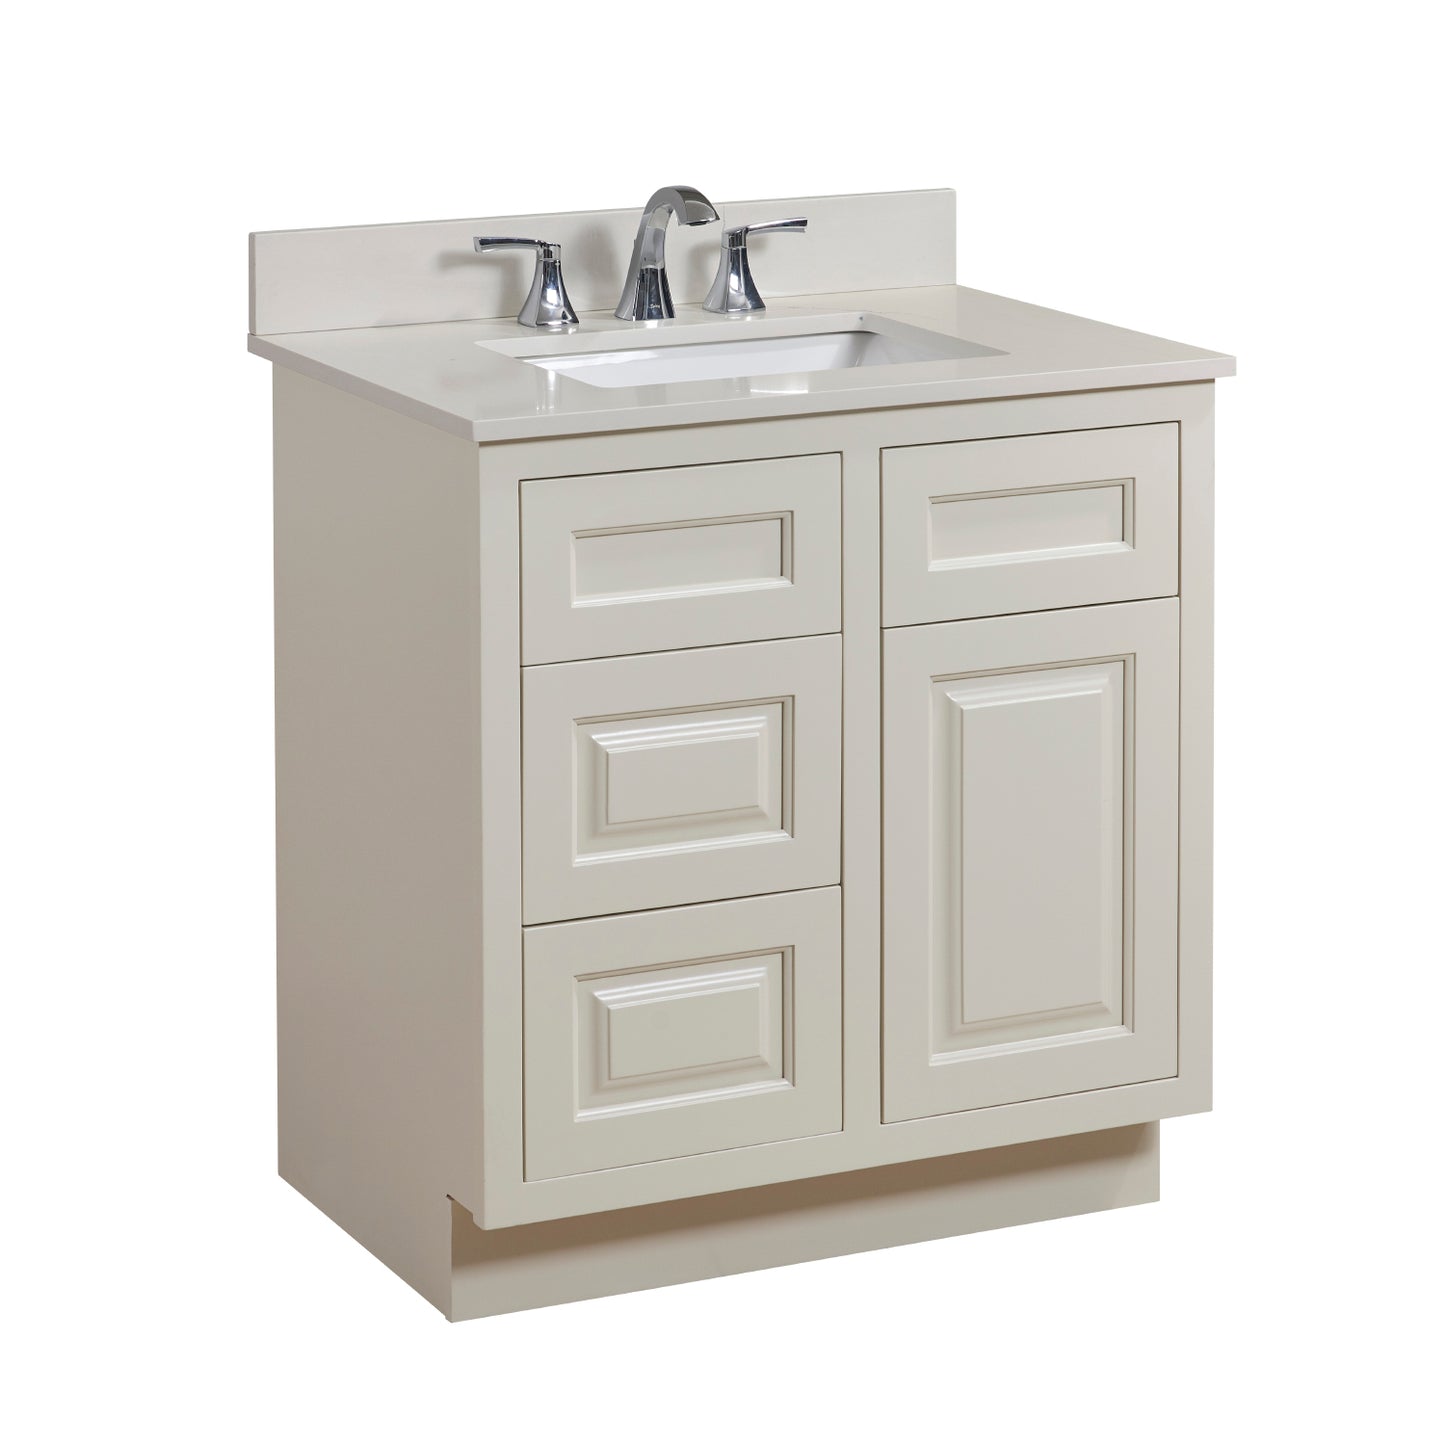 Stone effects Vanity Top in Milano White with White Sink